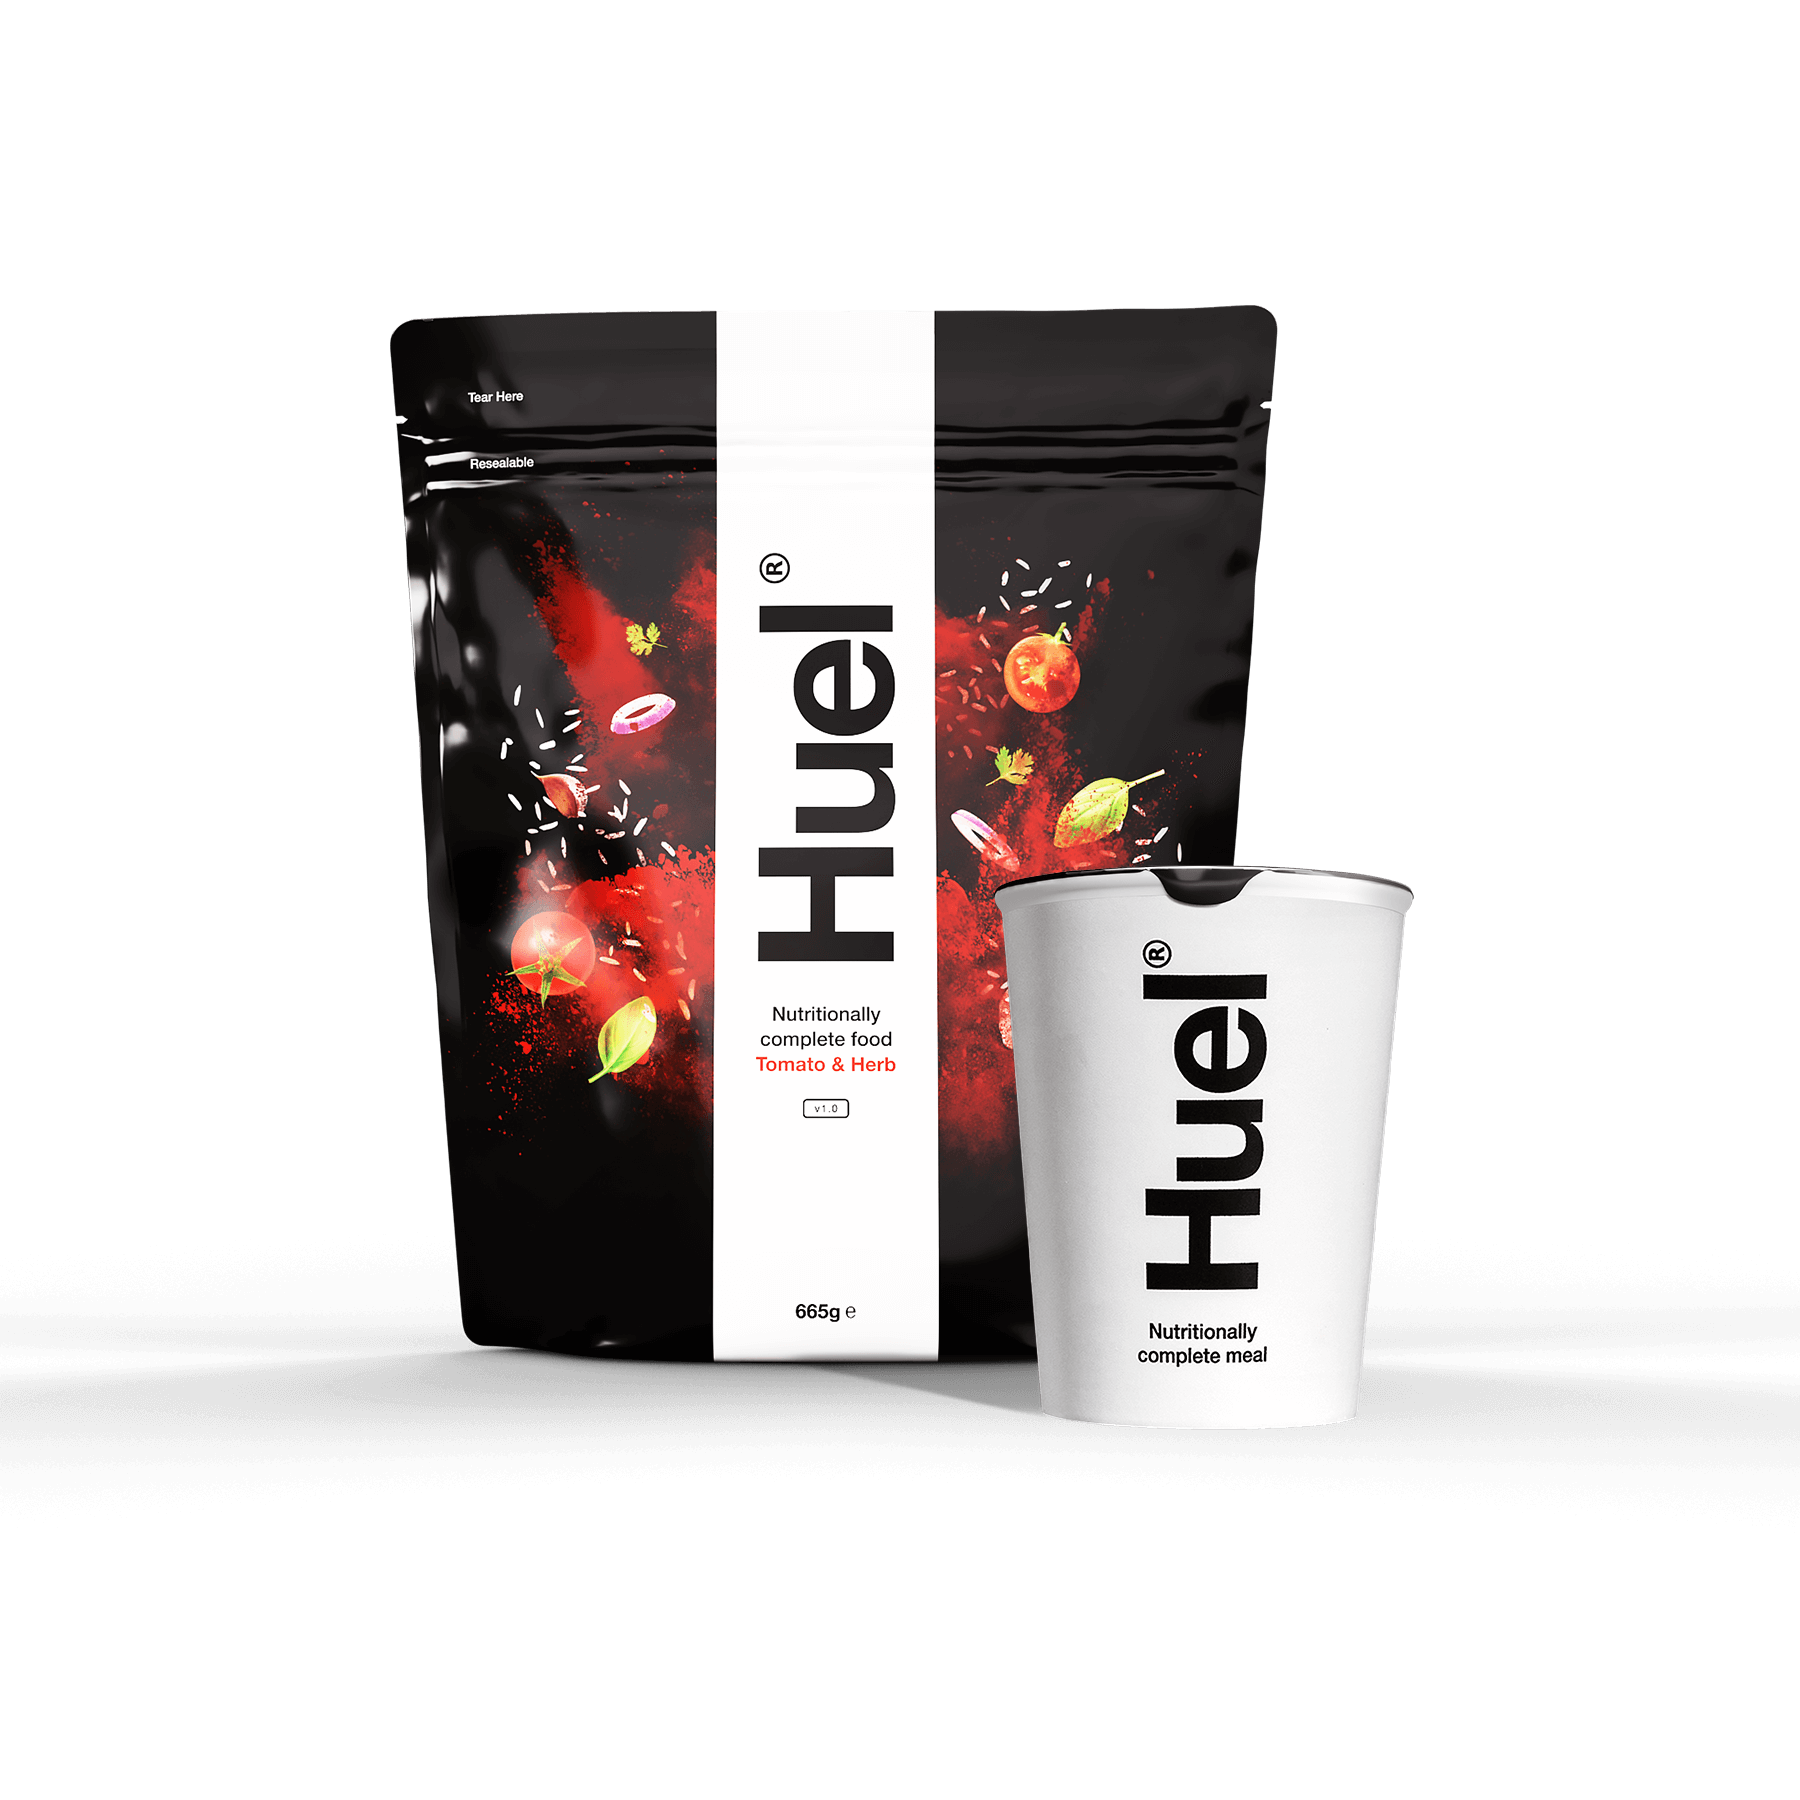 Huel V3.0 Banana and Huel Black: A Normal Person's Review (2 year update) 